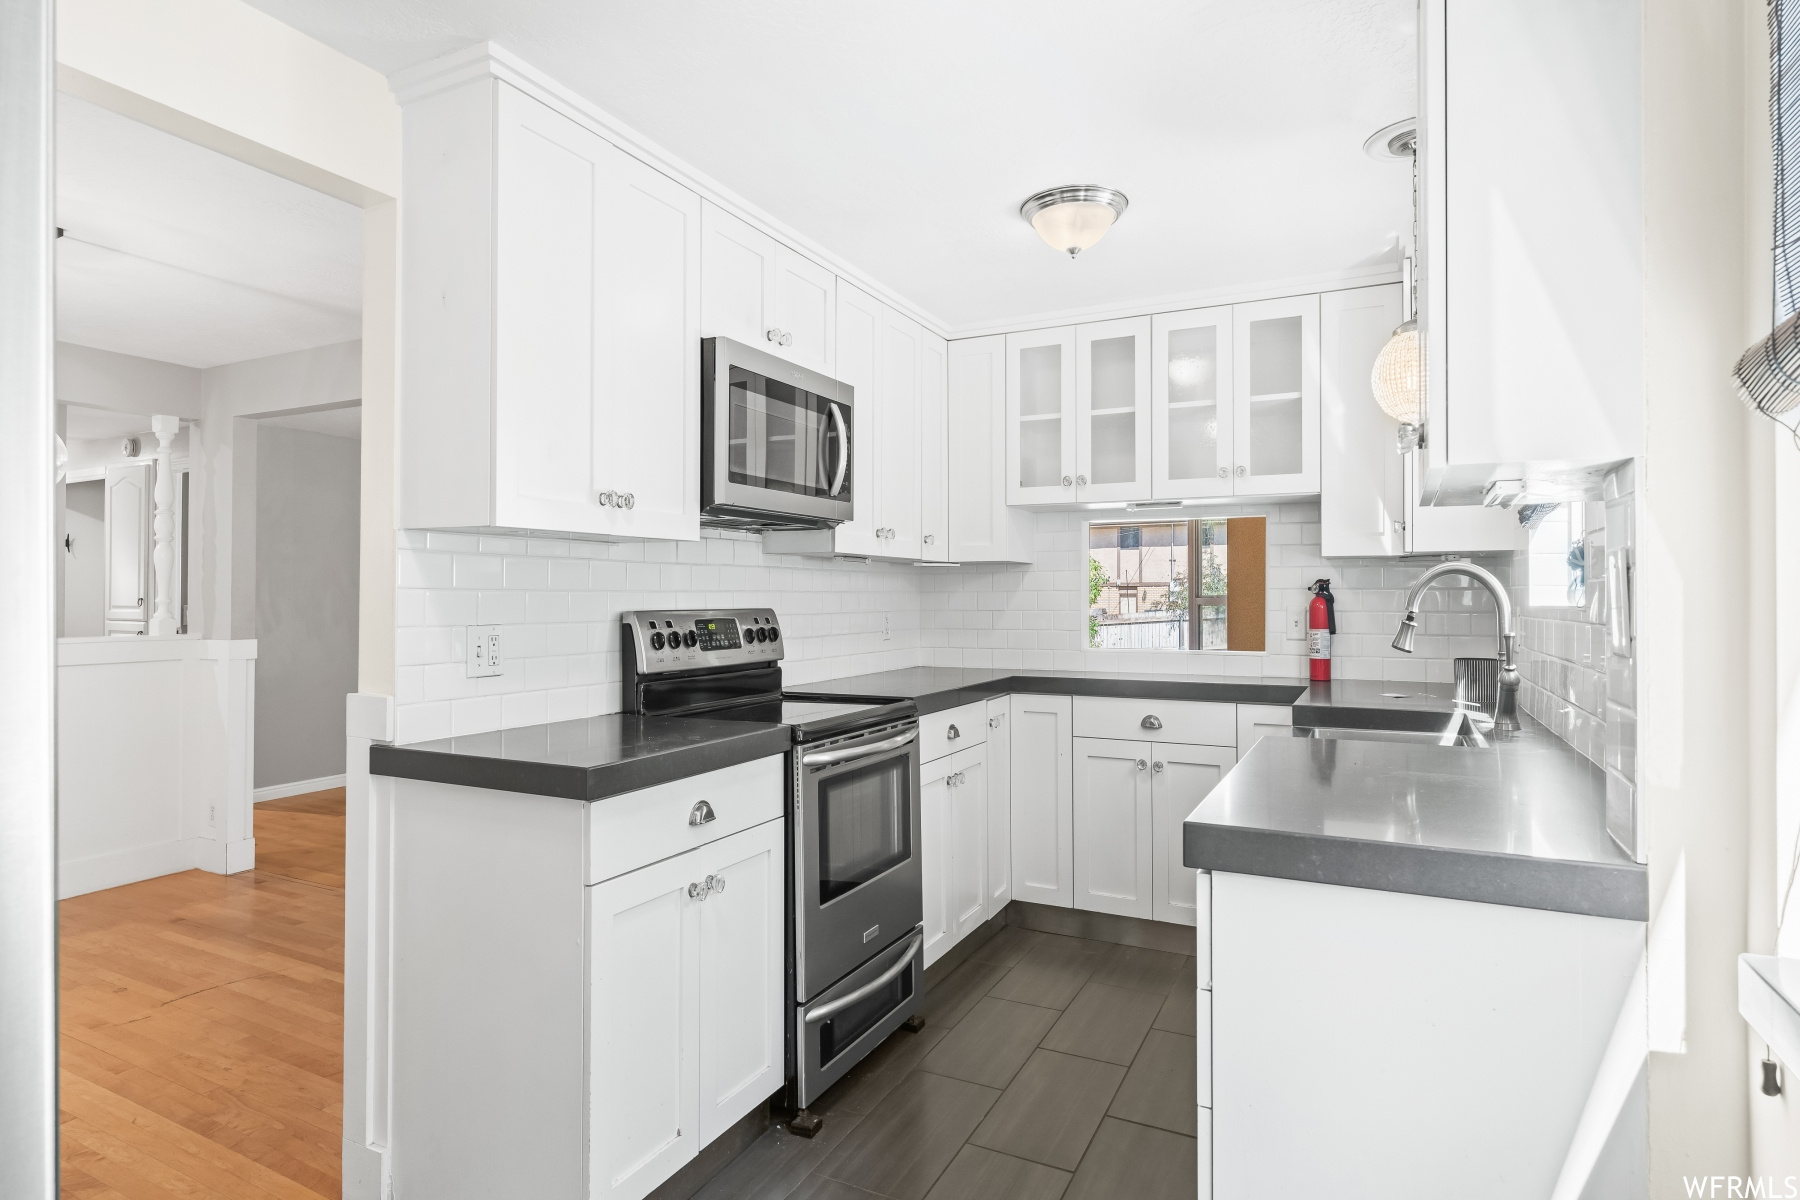 Kitchen with appliances with stainless steel finishes, light parquet floors, white cabinets, and backsplash